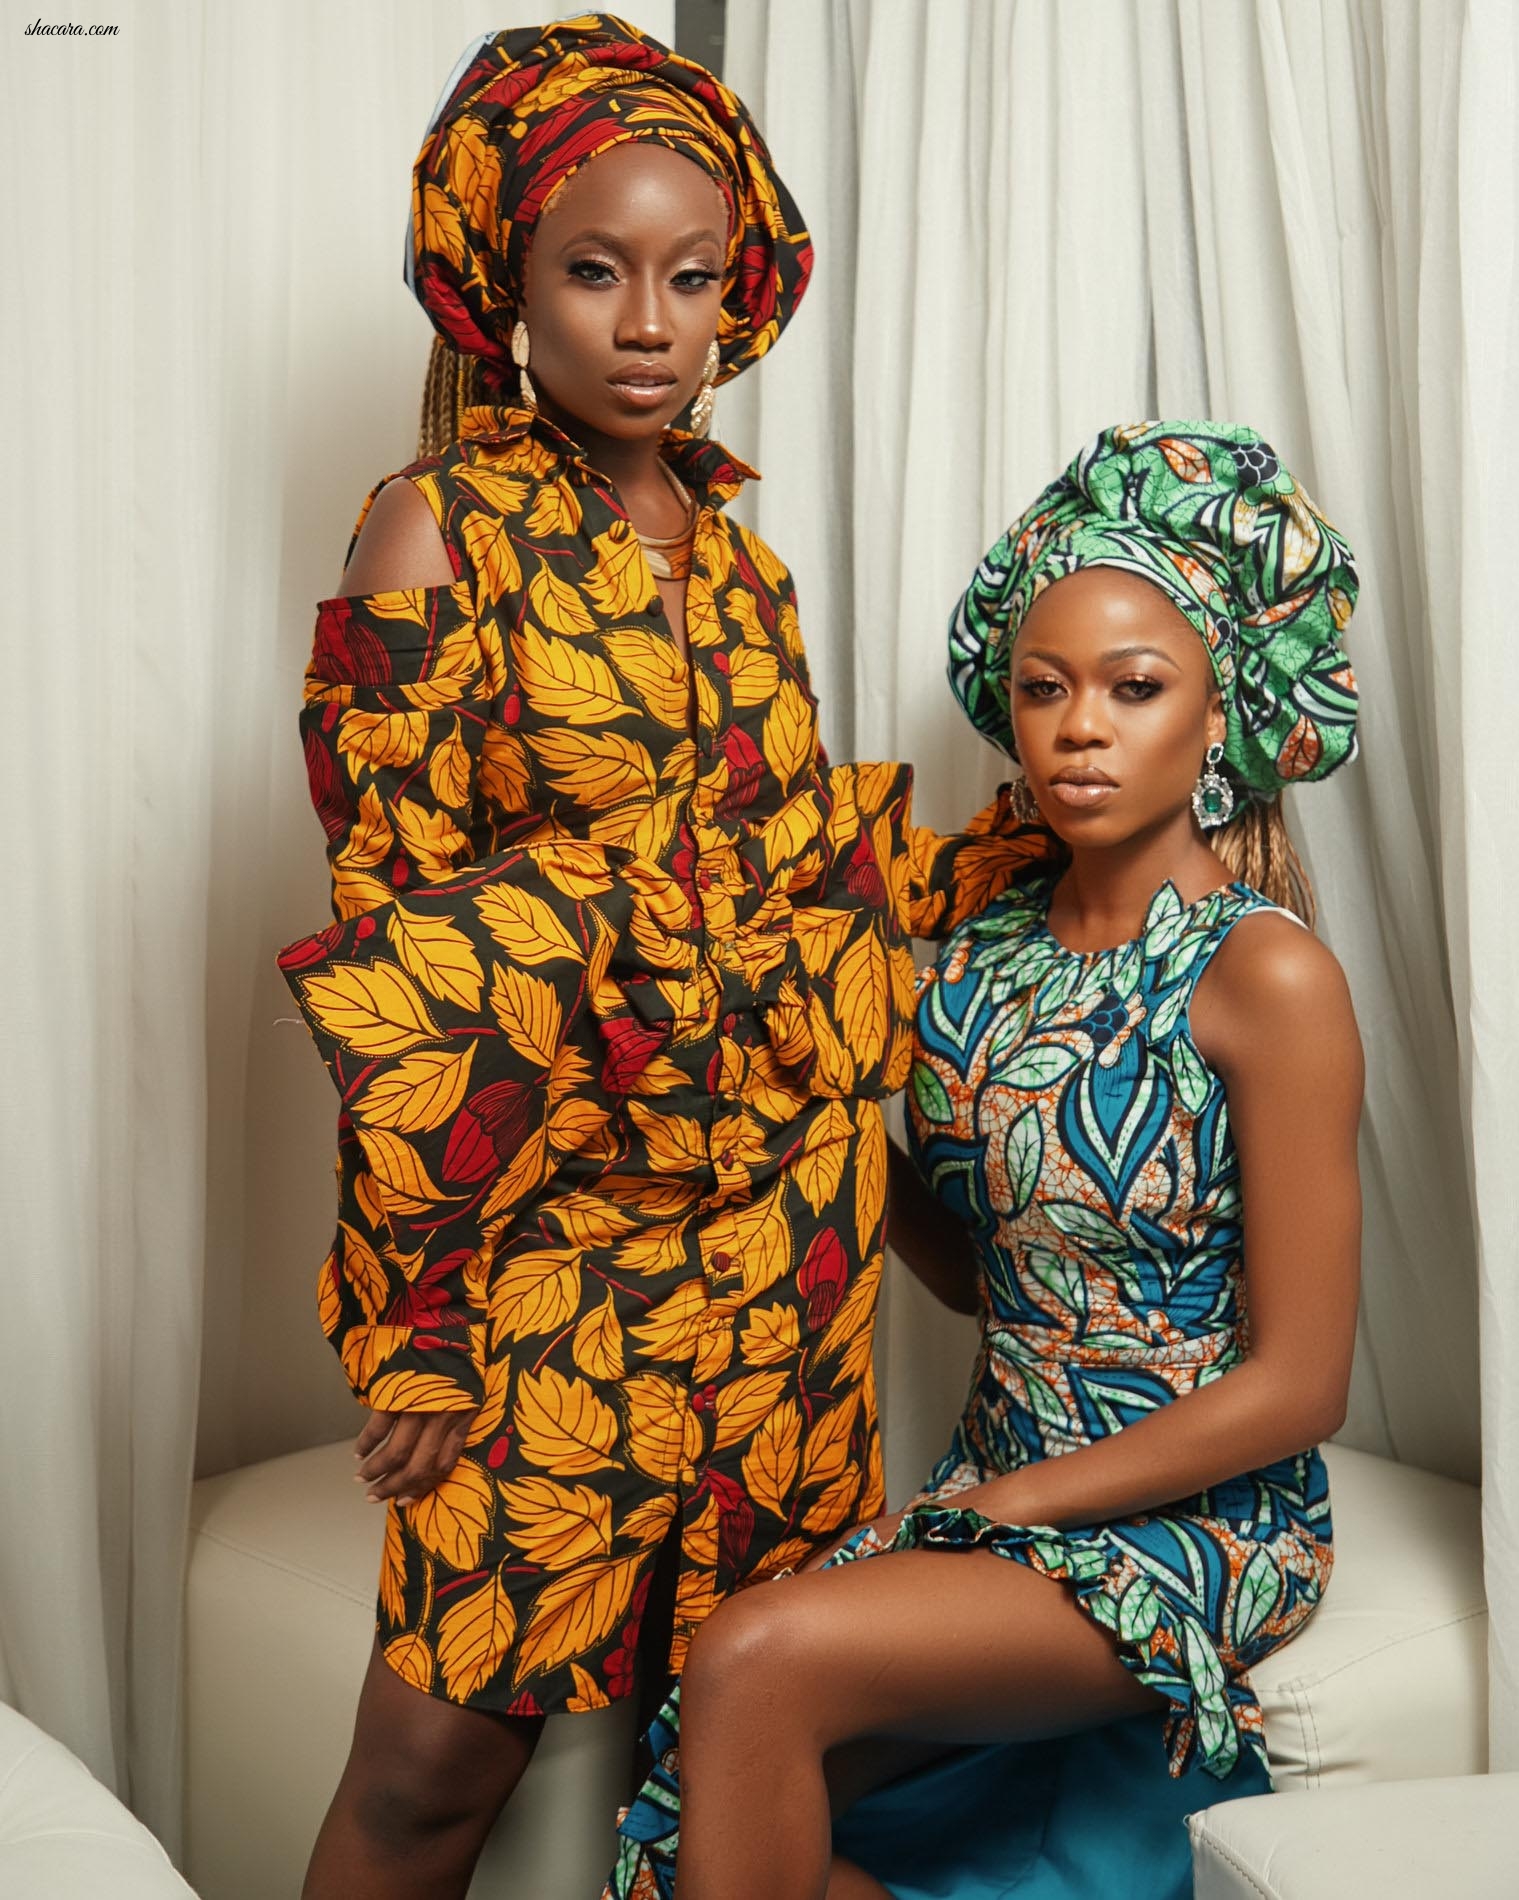 For The Love Of African Wax Print! Tania Omotayo, Juliana Olayede, Soliat Bada And Mariam Adeyemi Star In Glam Africa Magazine’s Latest Feature